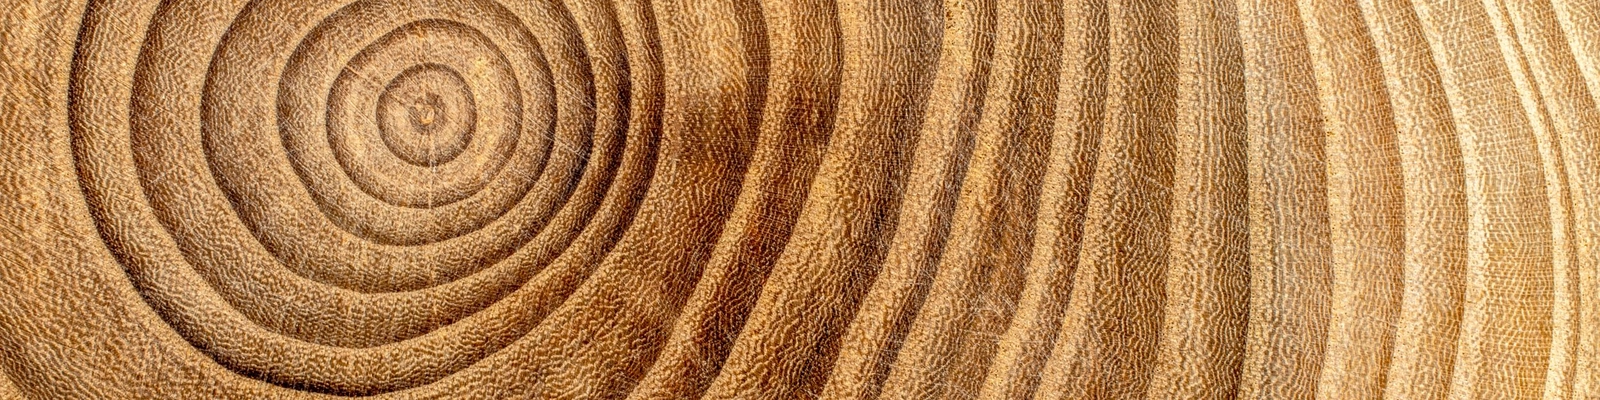 Wood and its features